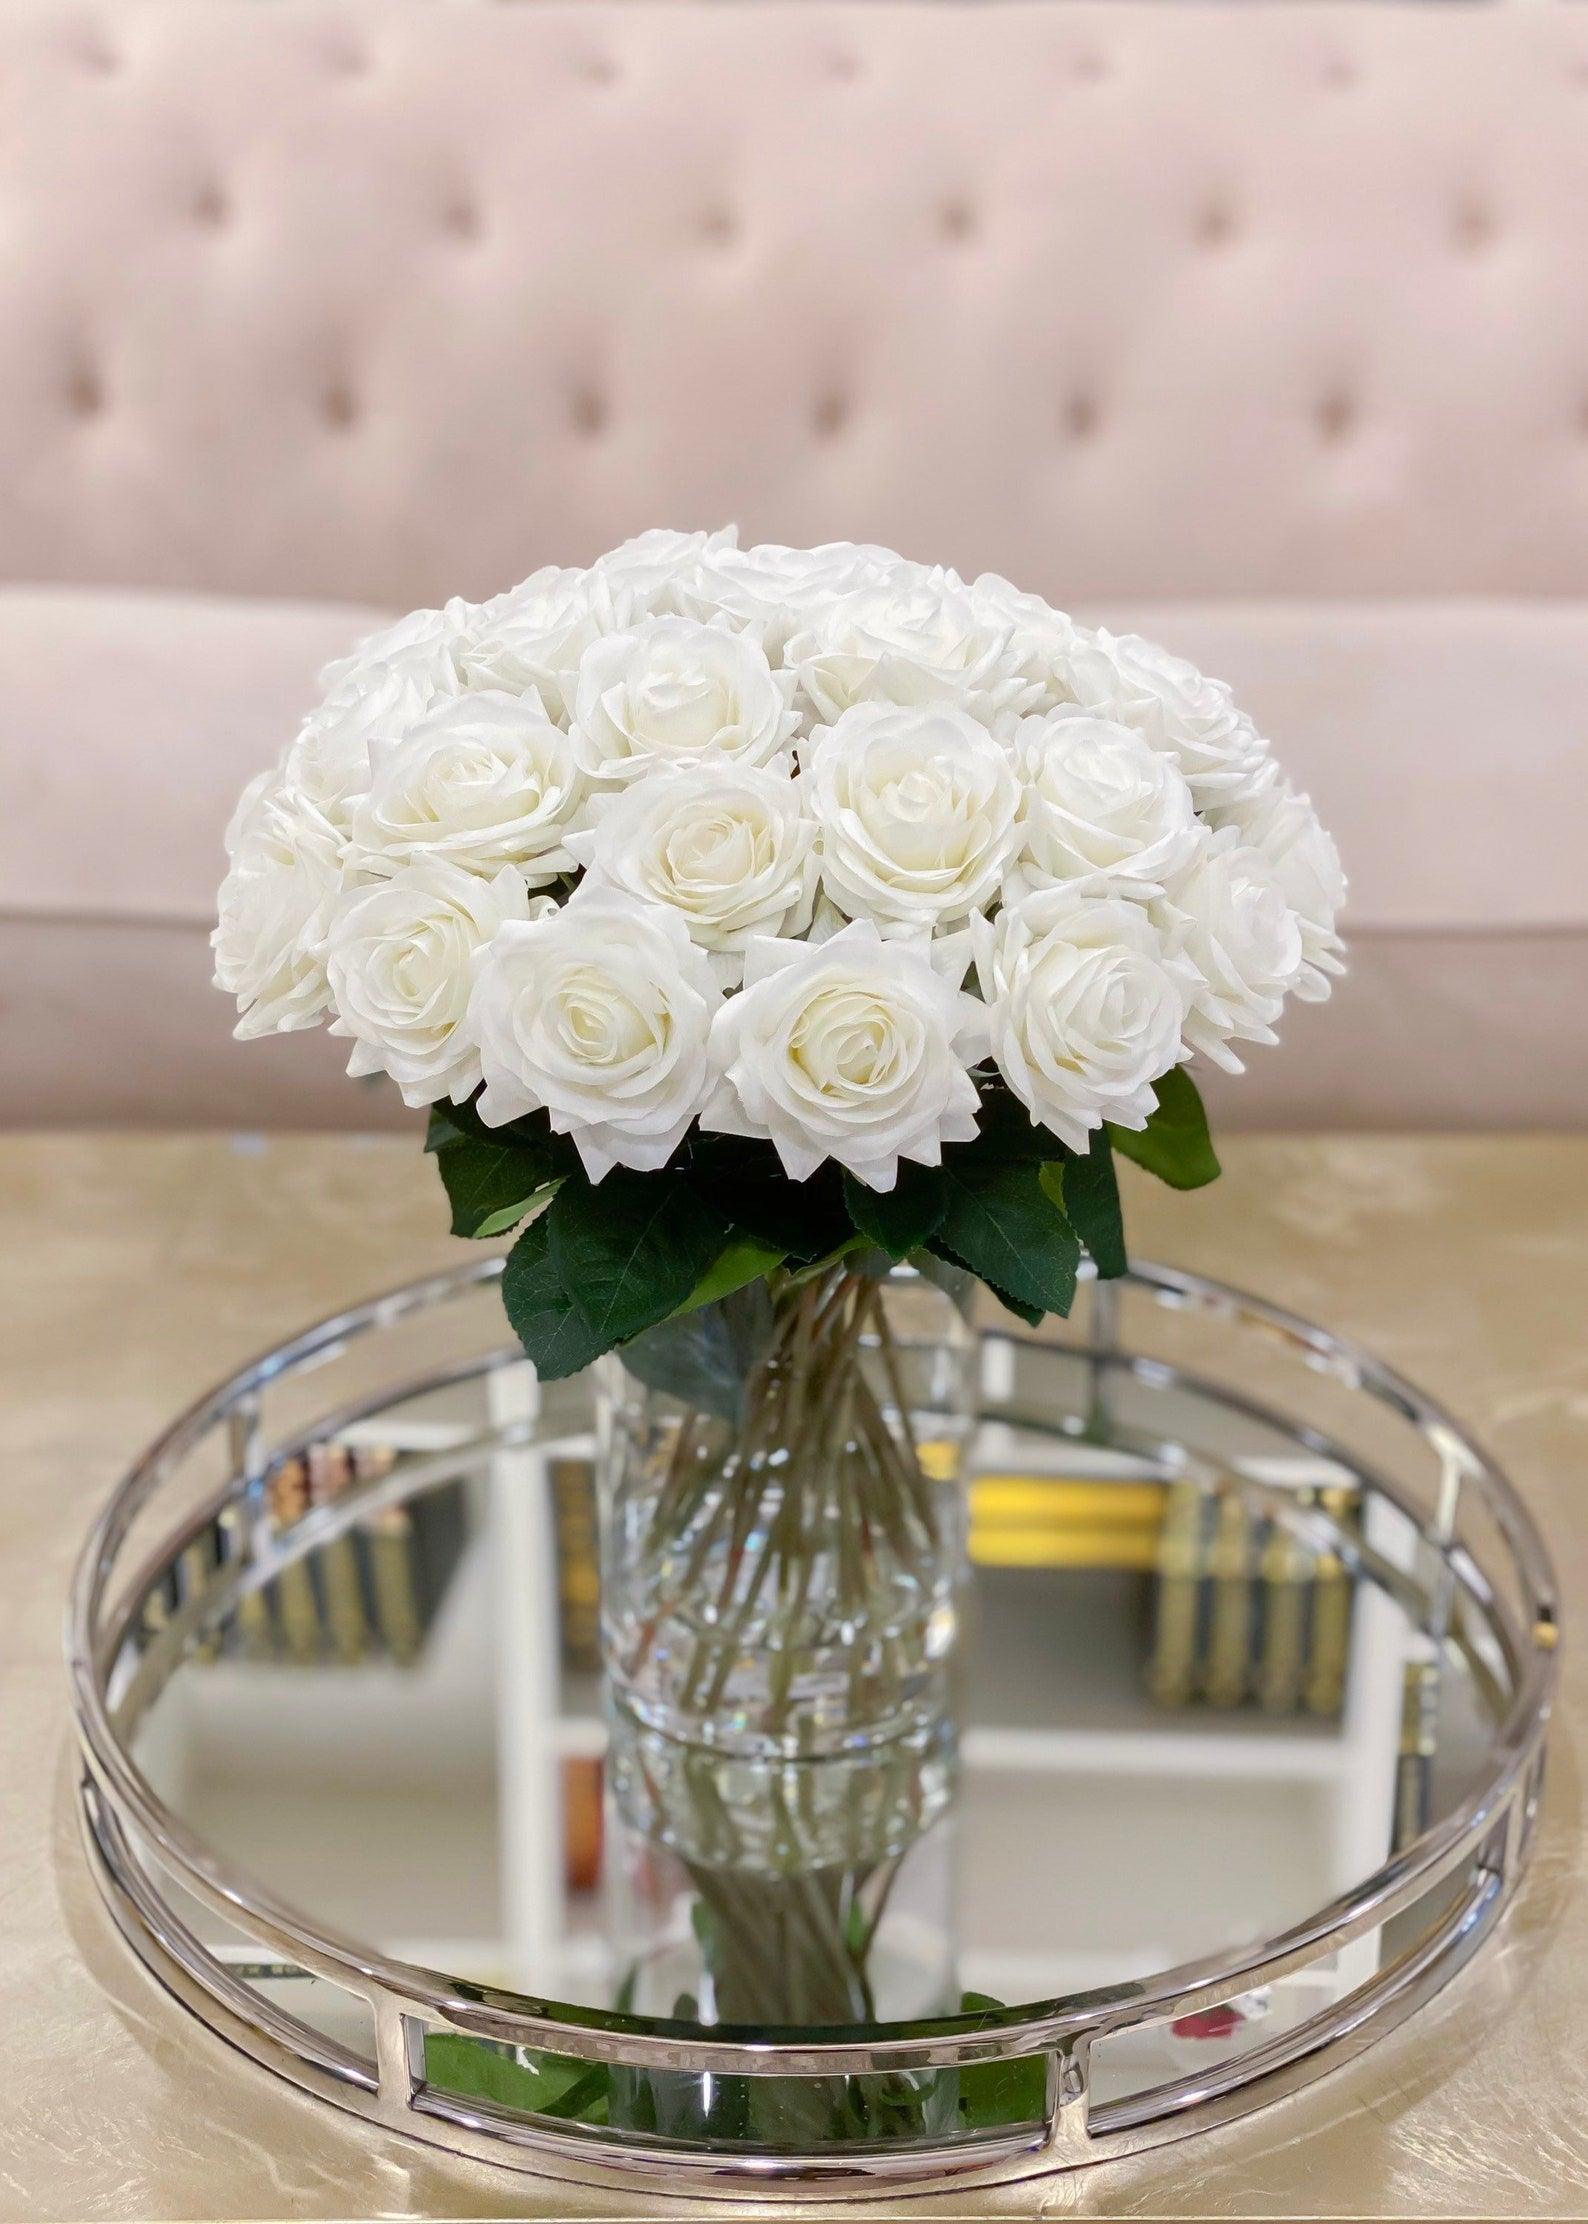 X-large Exclusive Finest Real Touch Roses Arrangement-multi 